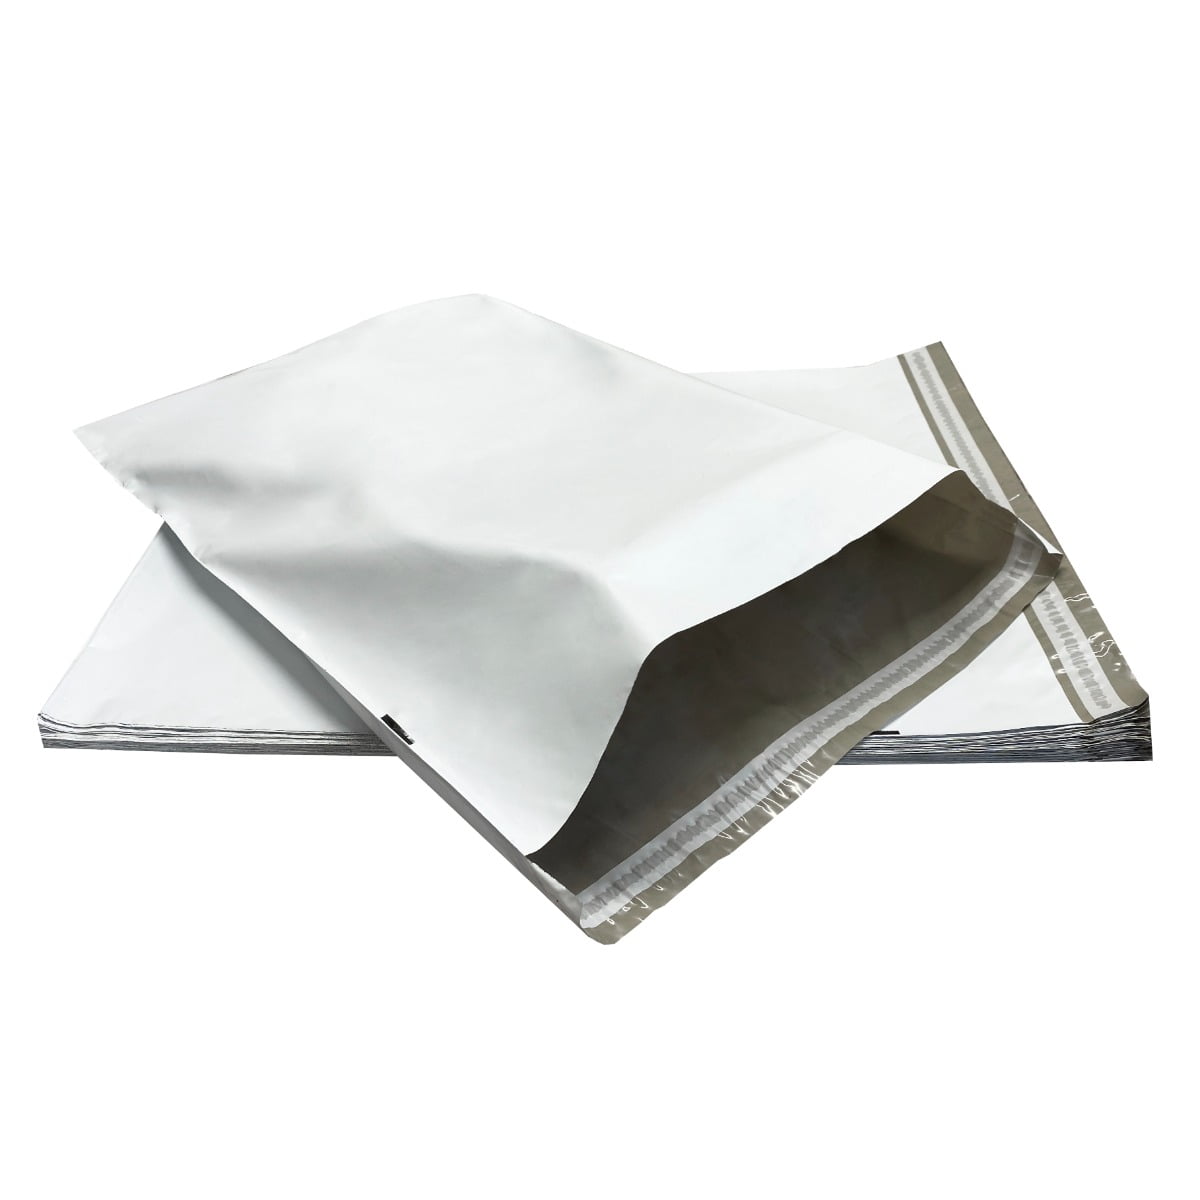 Blue Mailing Bags 10 25 50 100 Strong Self Seal Plastic Available in All SIzes 